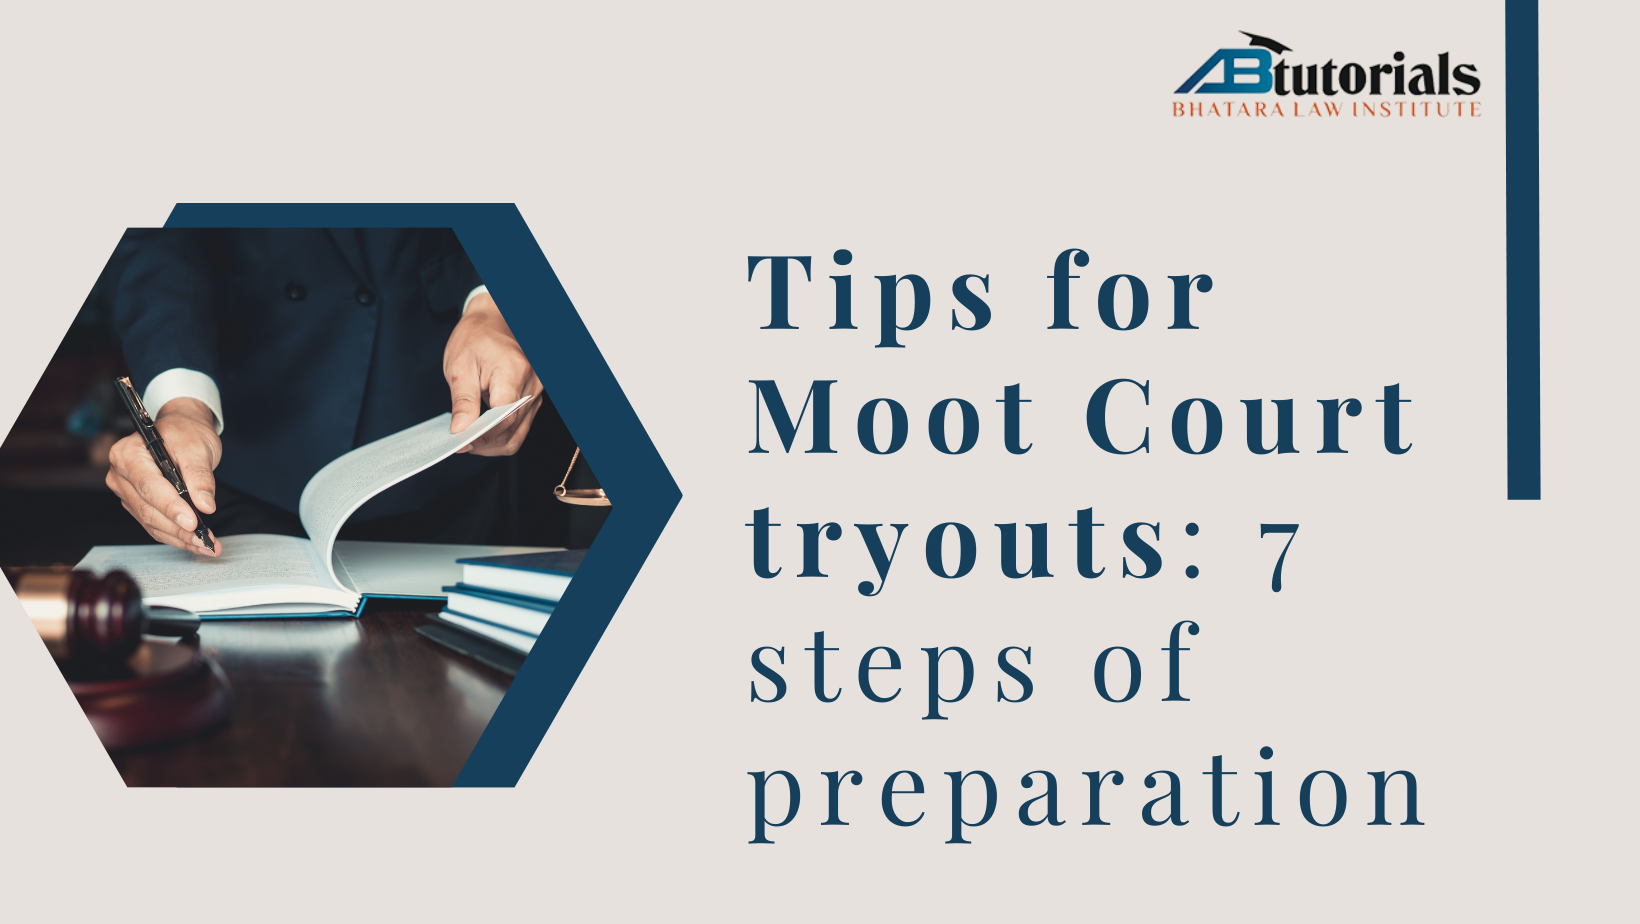 Tips for Moot Court Tryouts: 7 Steps of Preparation